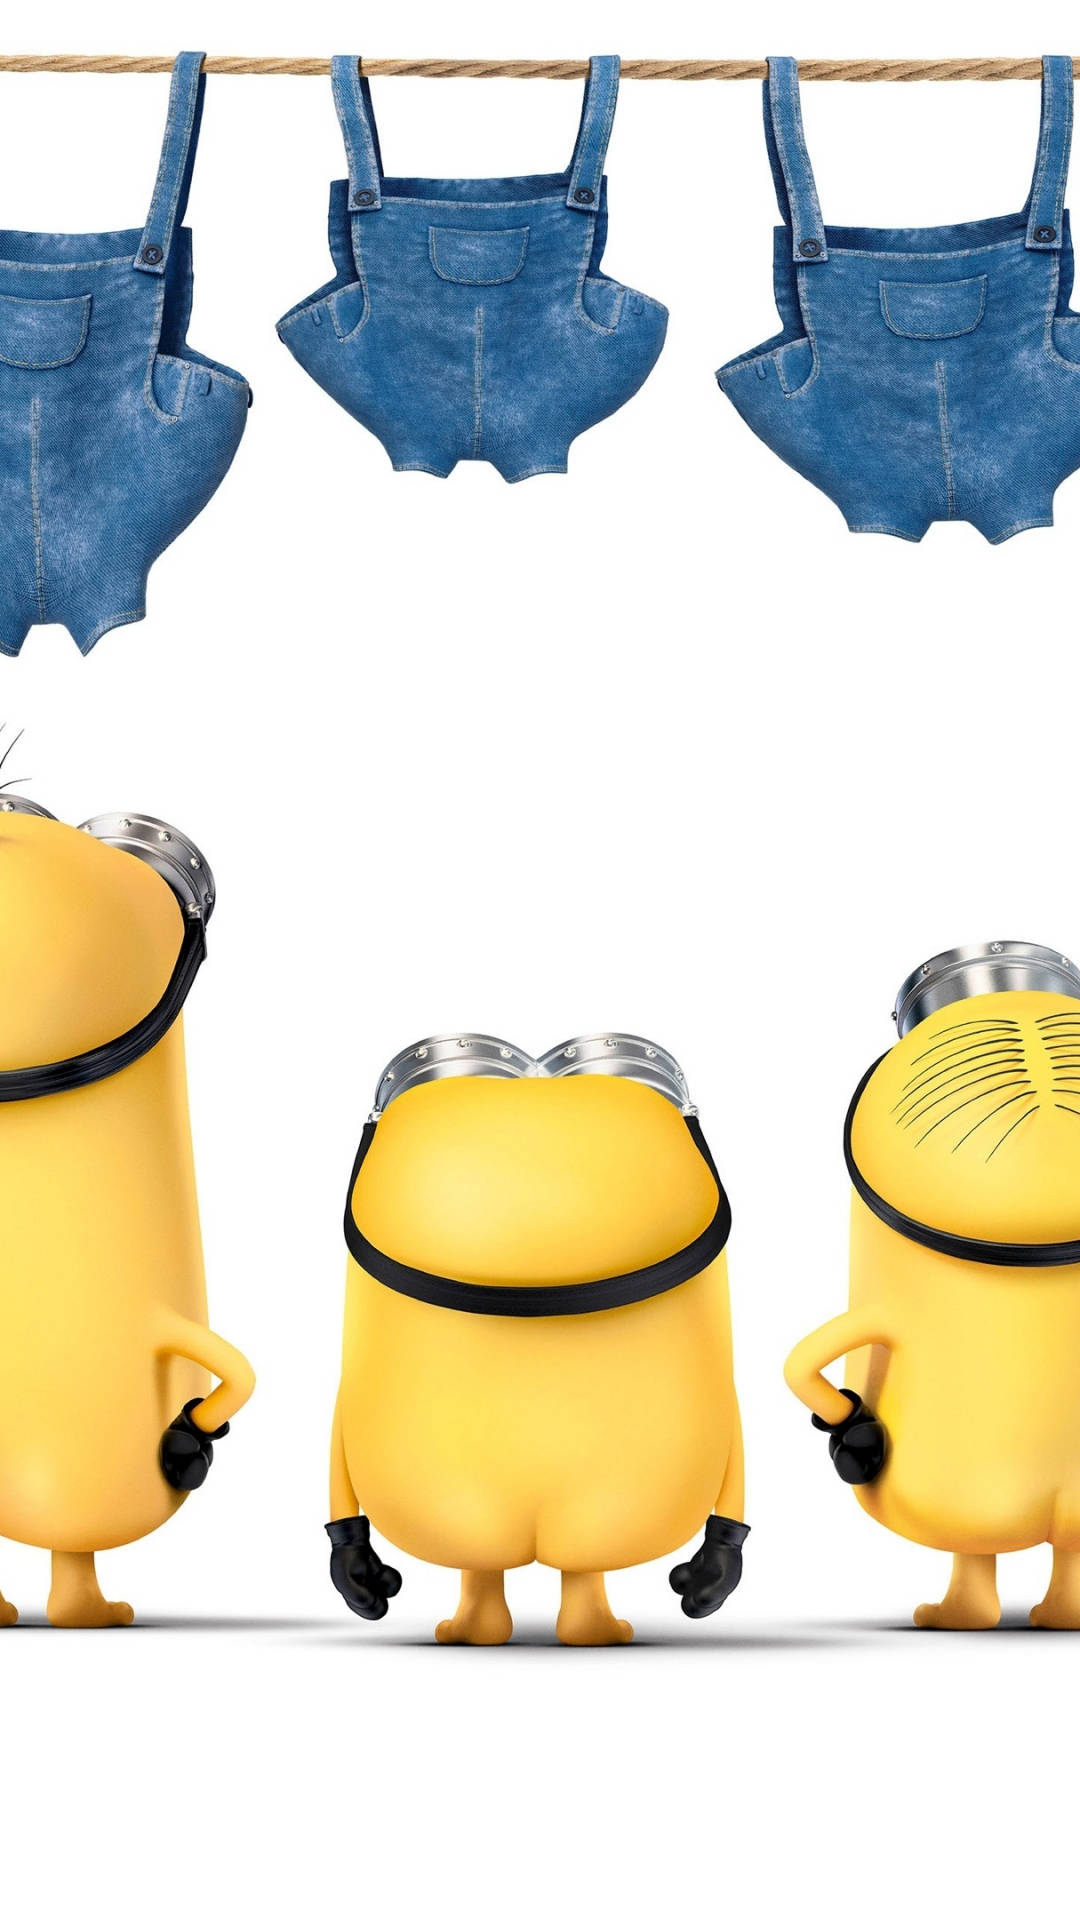 Get Minionized with the all-new Minion Phone Wallpaper